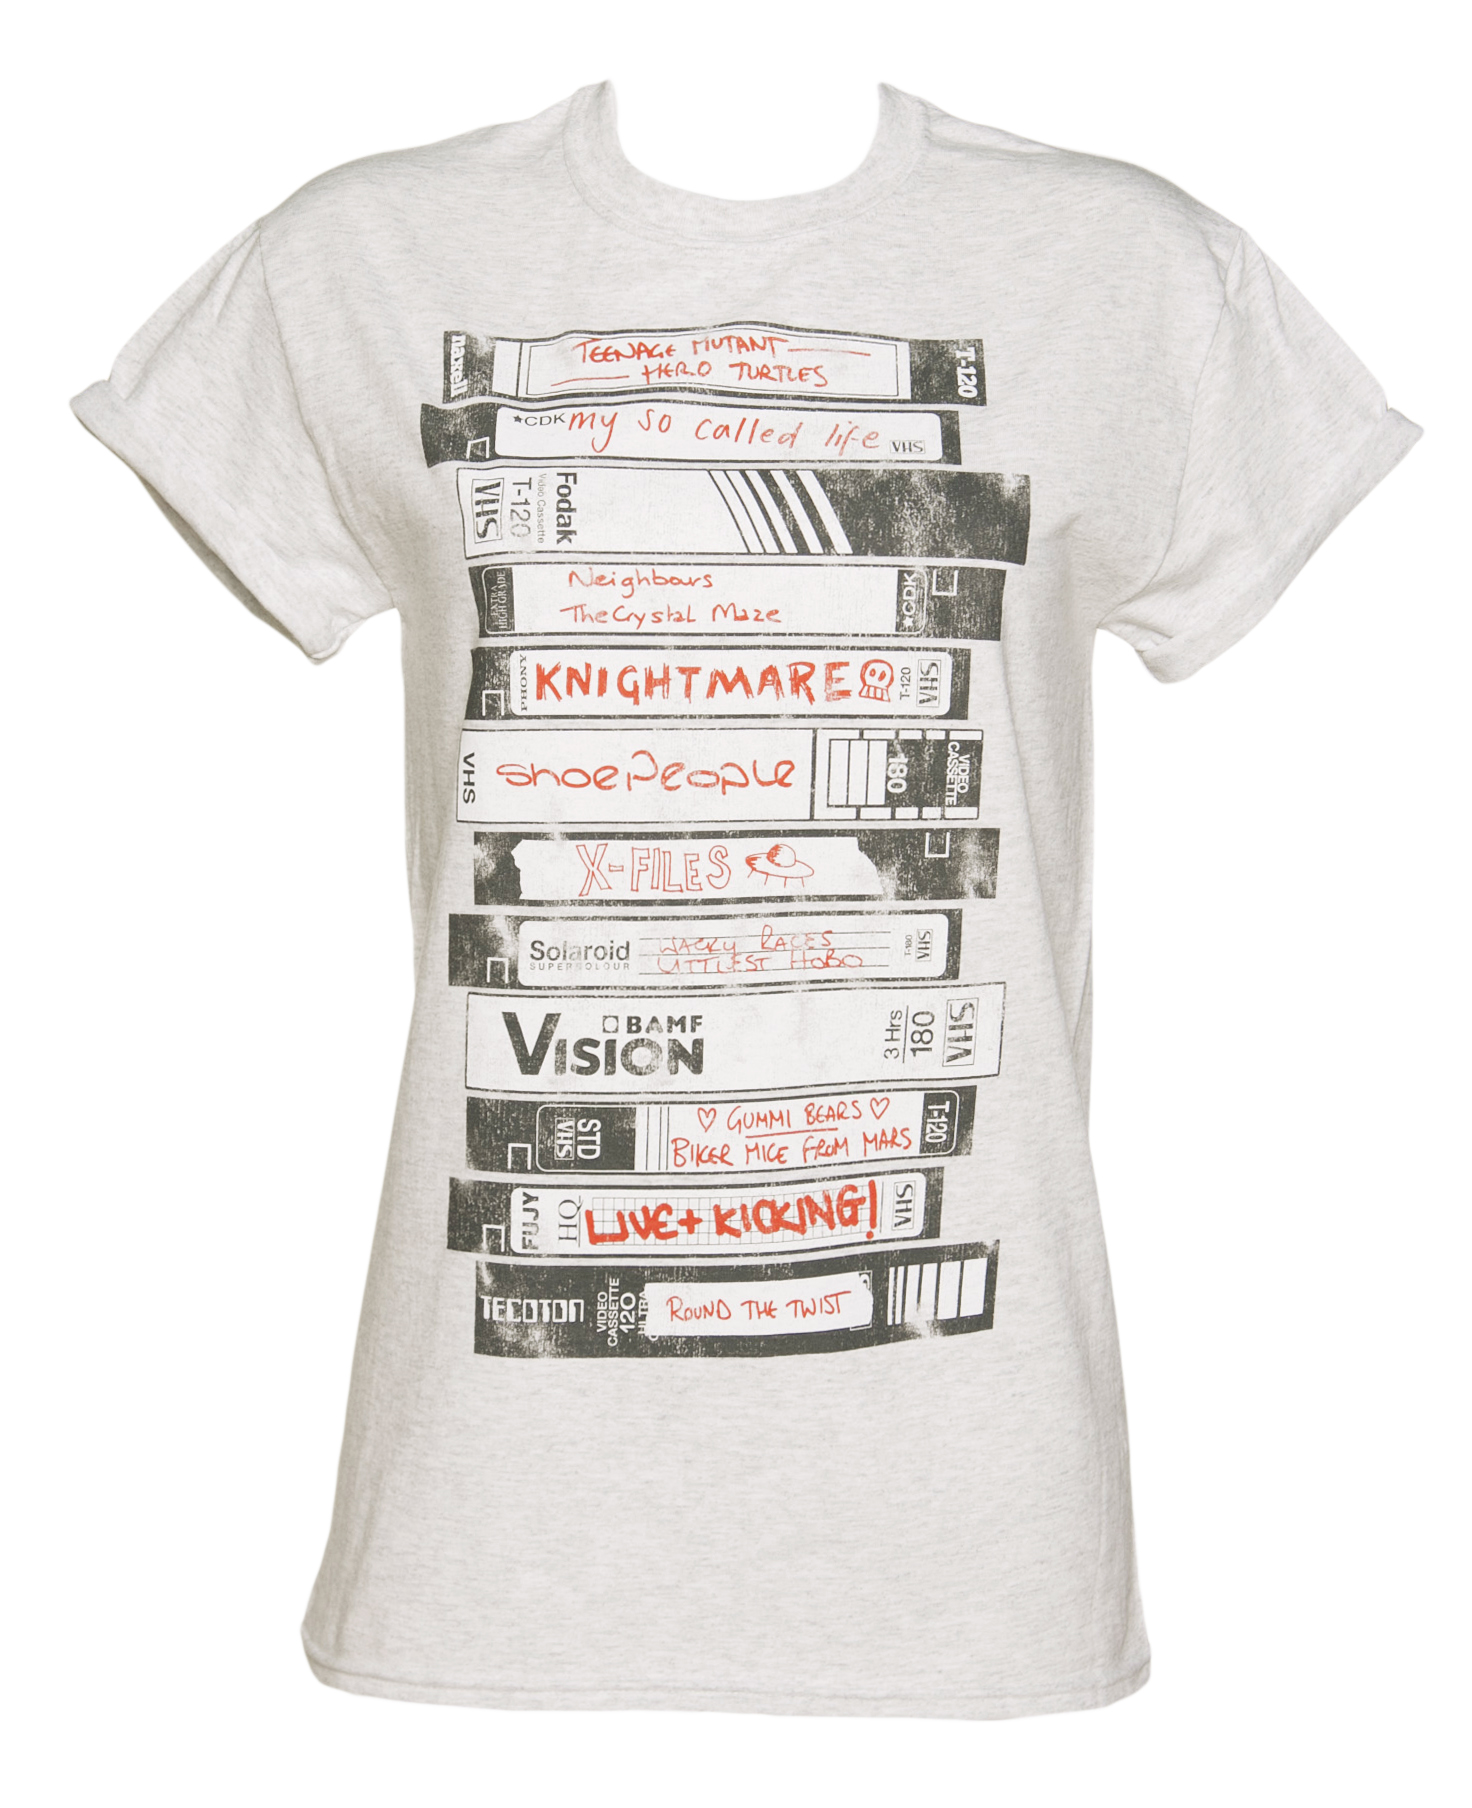  Ladies Old School Video Tapes Collection Rolled Sleeve Boyfriend T-Shirt £19.99